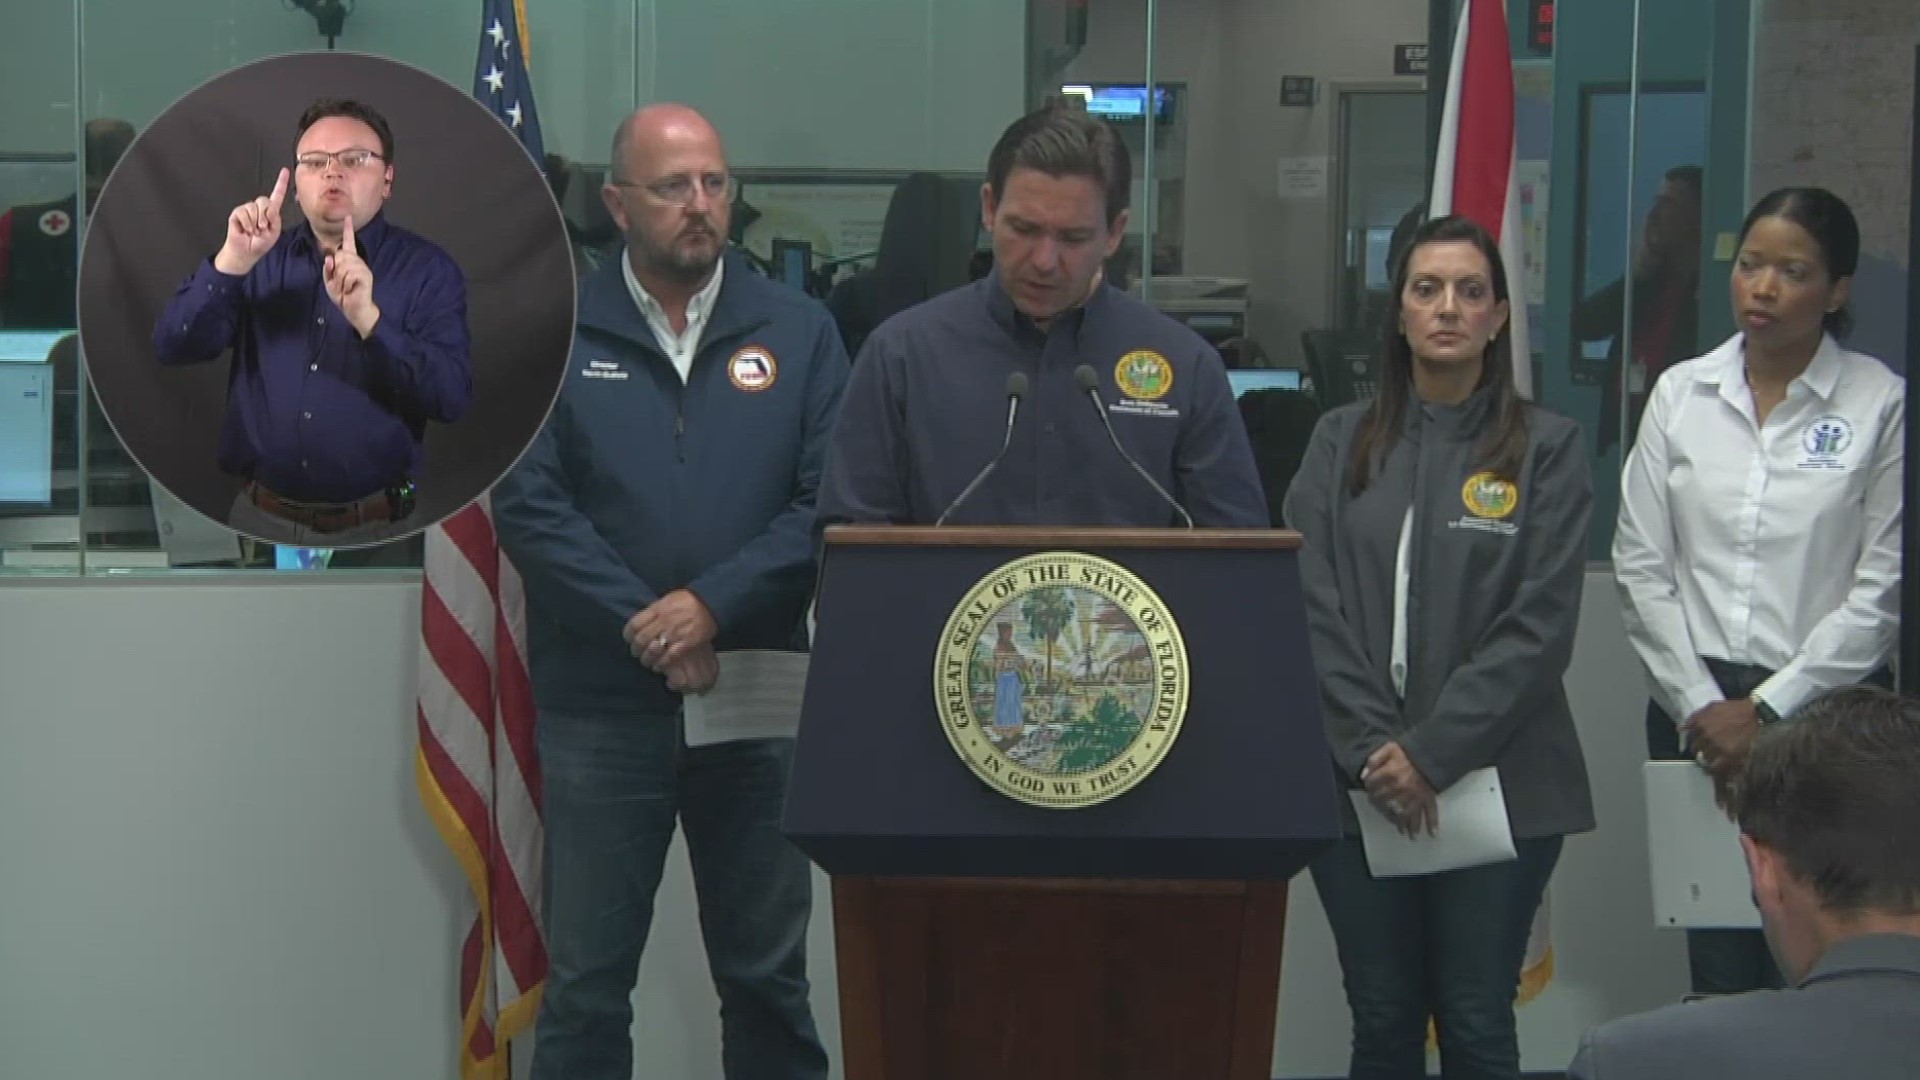 In the latest press conference, DeSantis outlined resources being sent to counties hardest hit by Idalia.